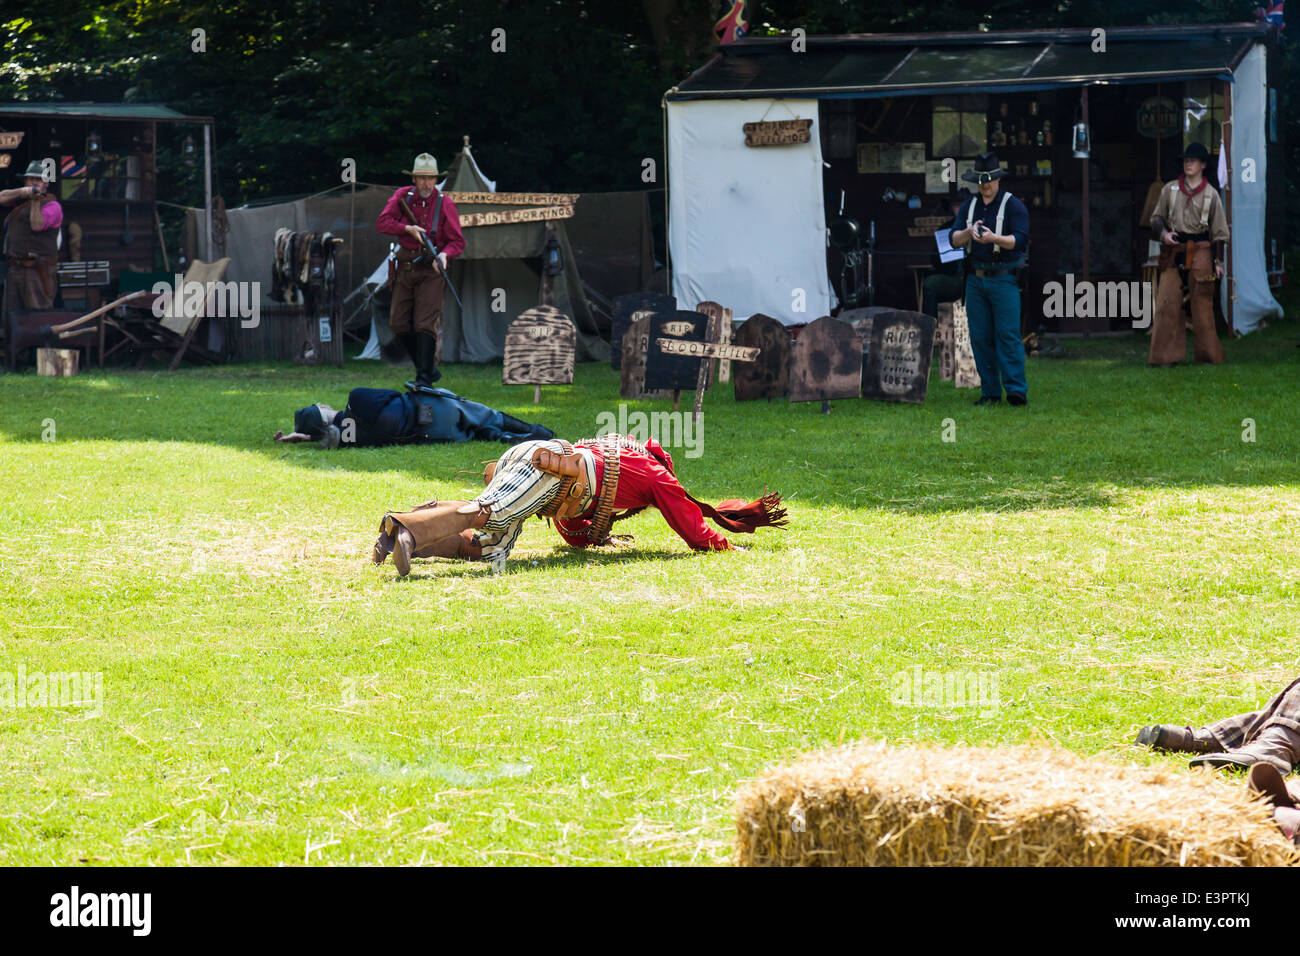 Leek, Staffordshire, England. 22nd June 2014, A Western Weekend. Outlaw falls to the ground after shootout. Western reenactment Stock Photo